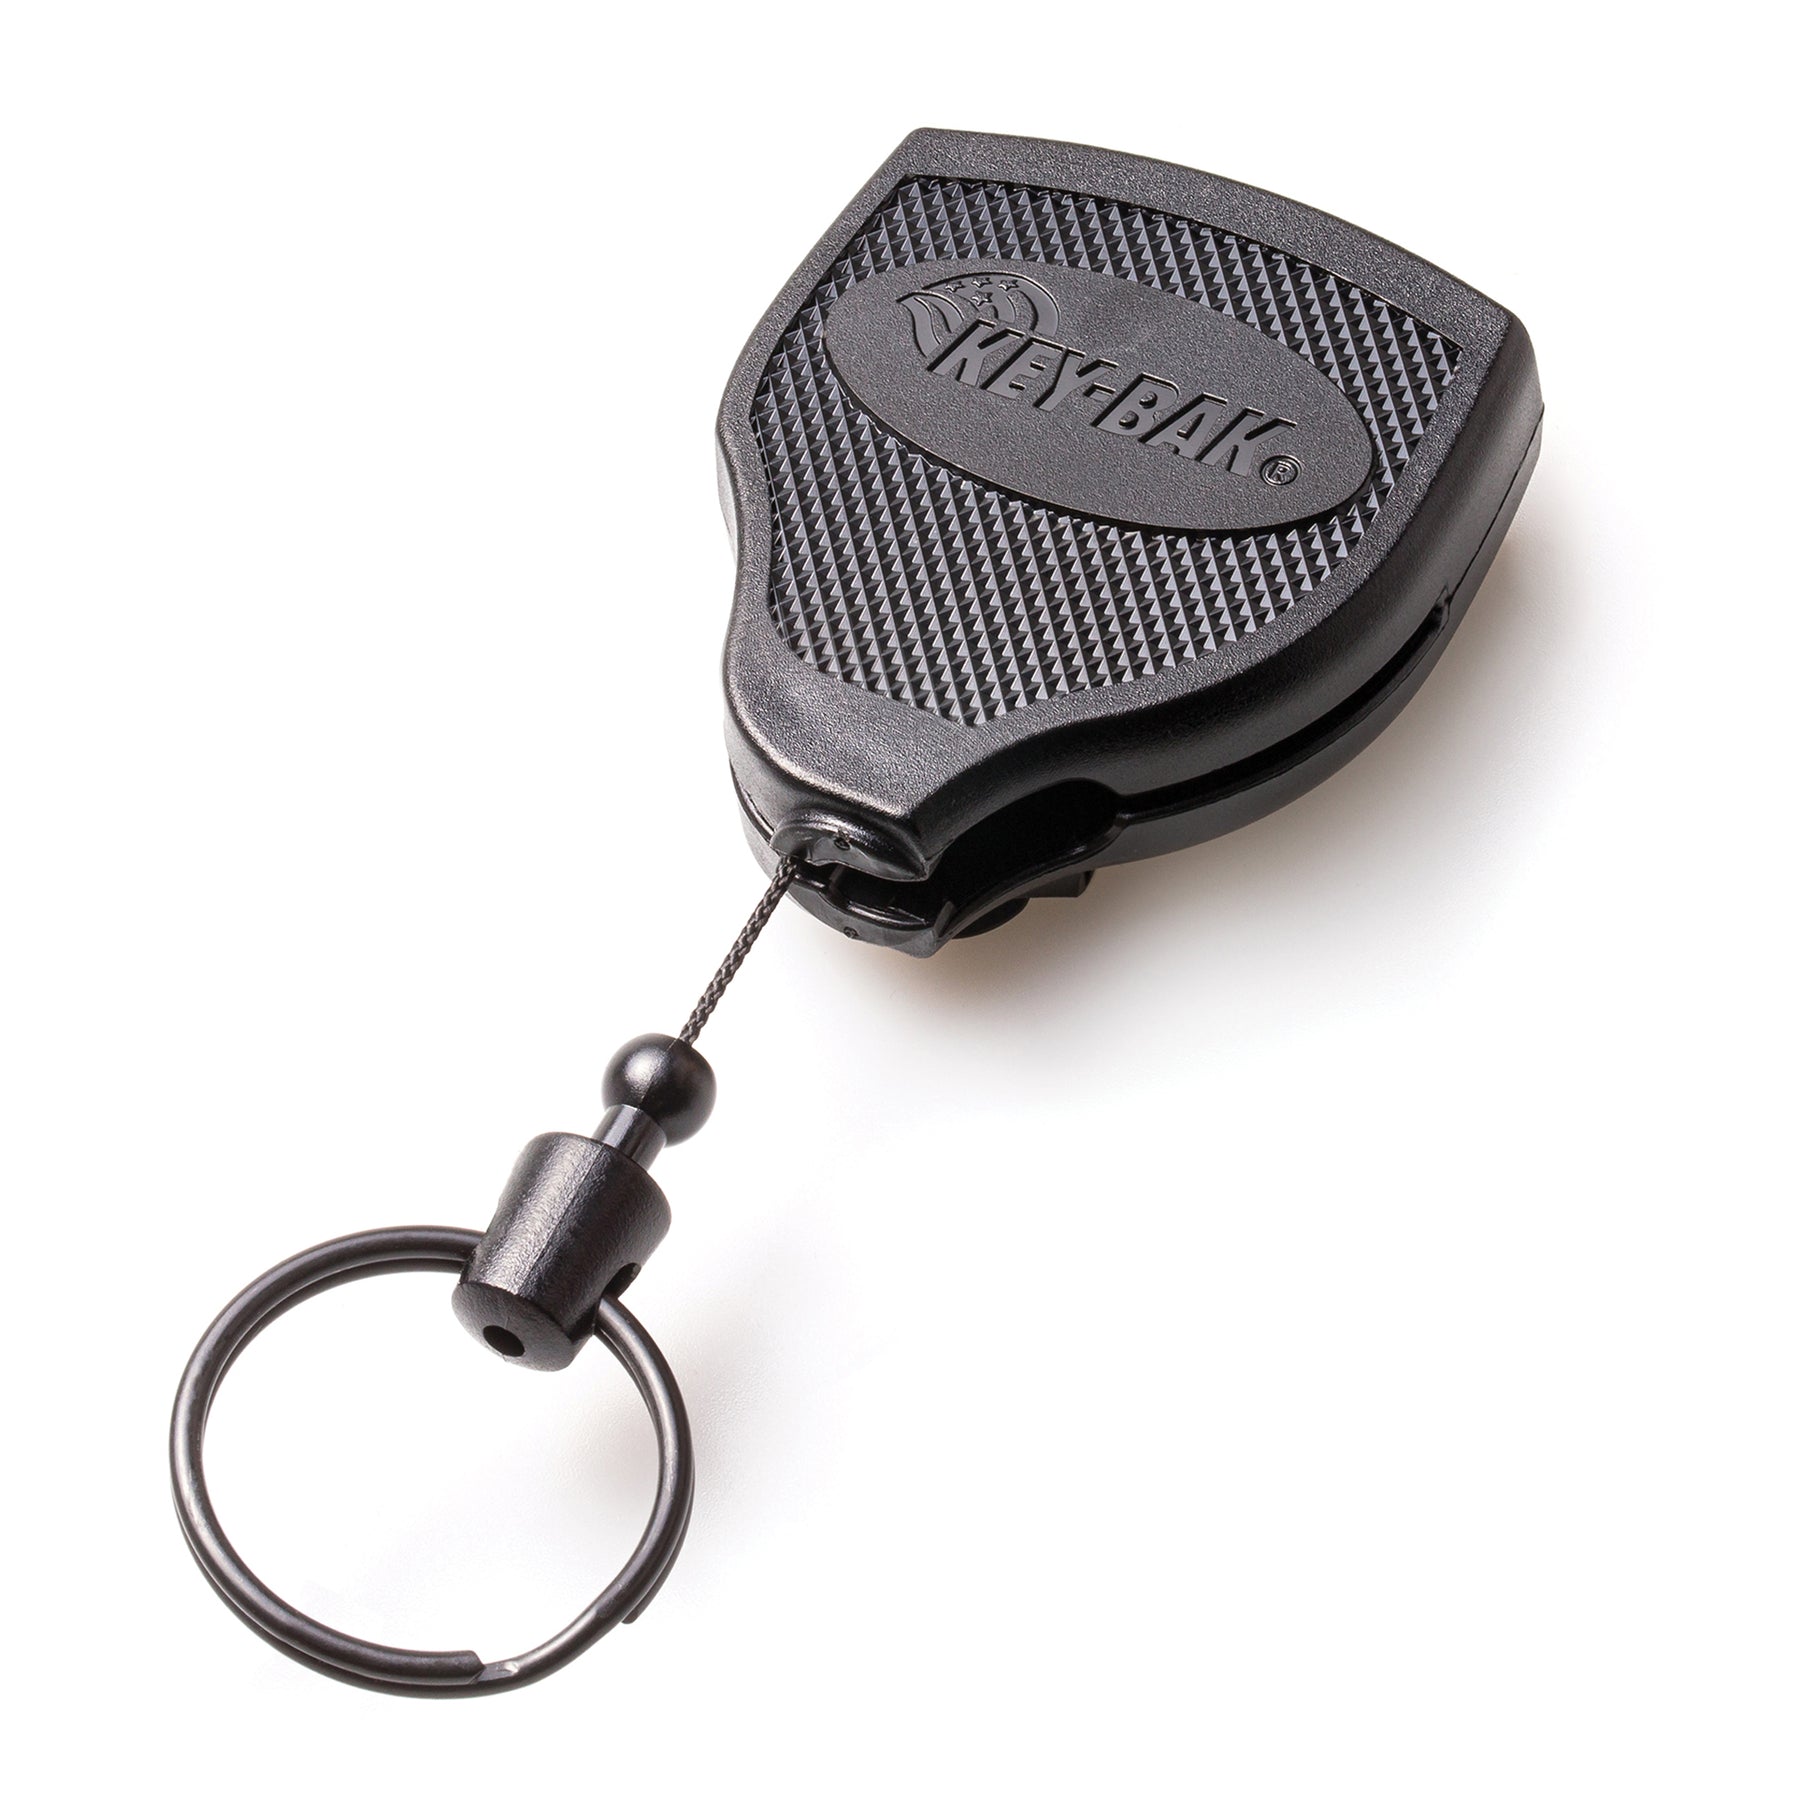 Key Bak Super Hd 8Oz Locking Retractable Keychain 48 Stainless Steel Cable, Black